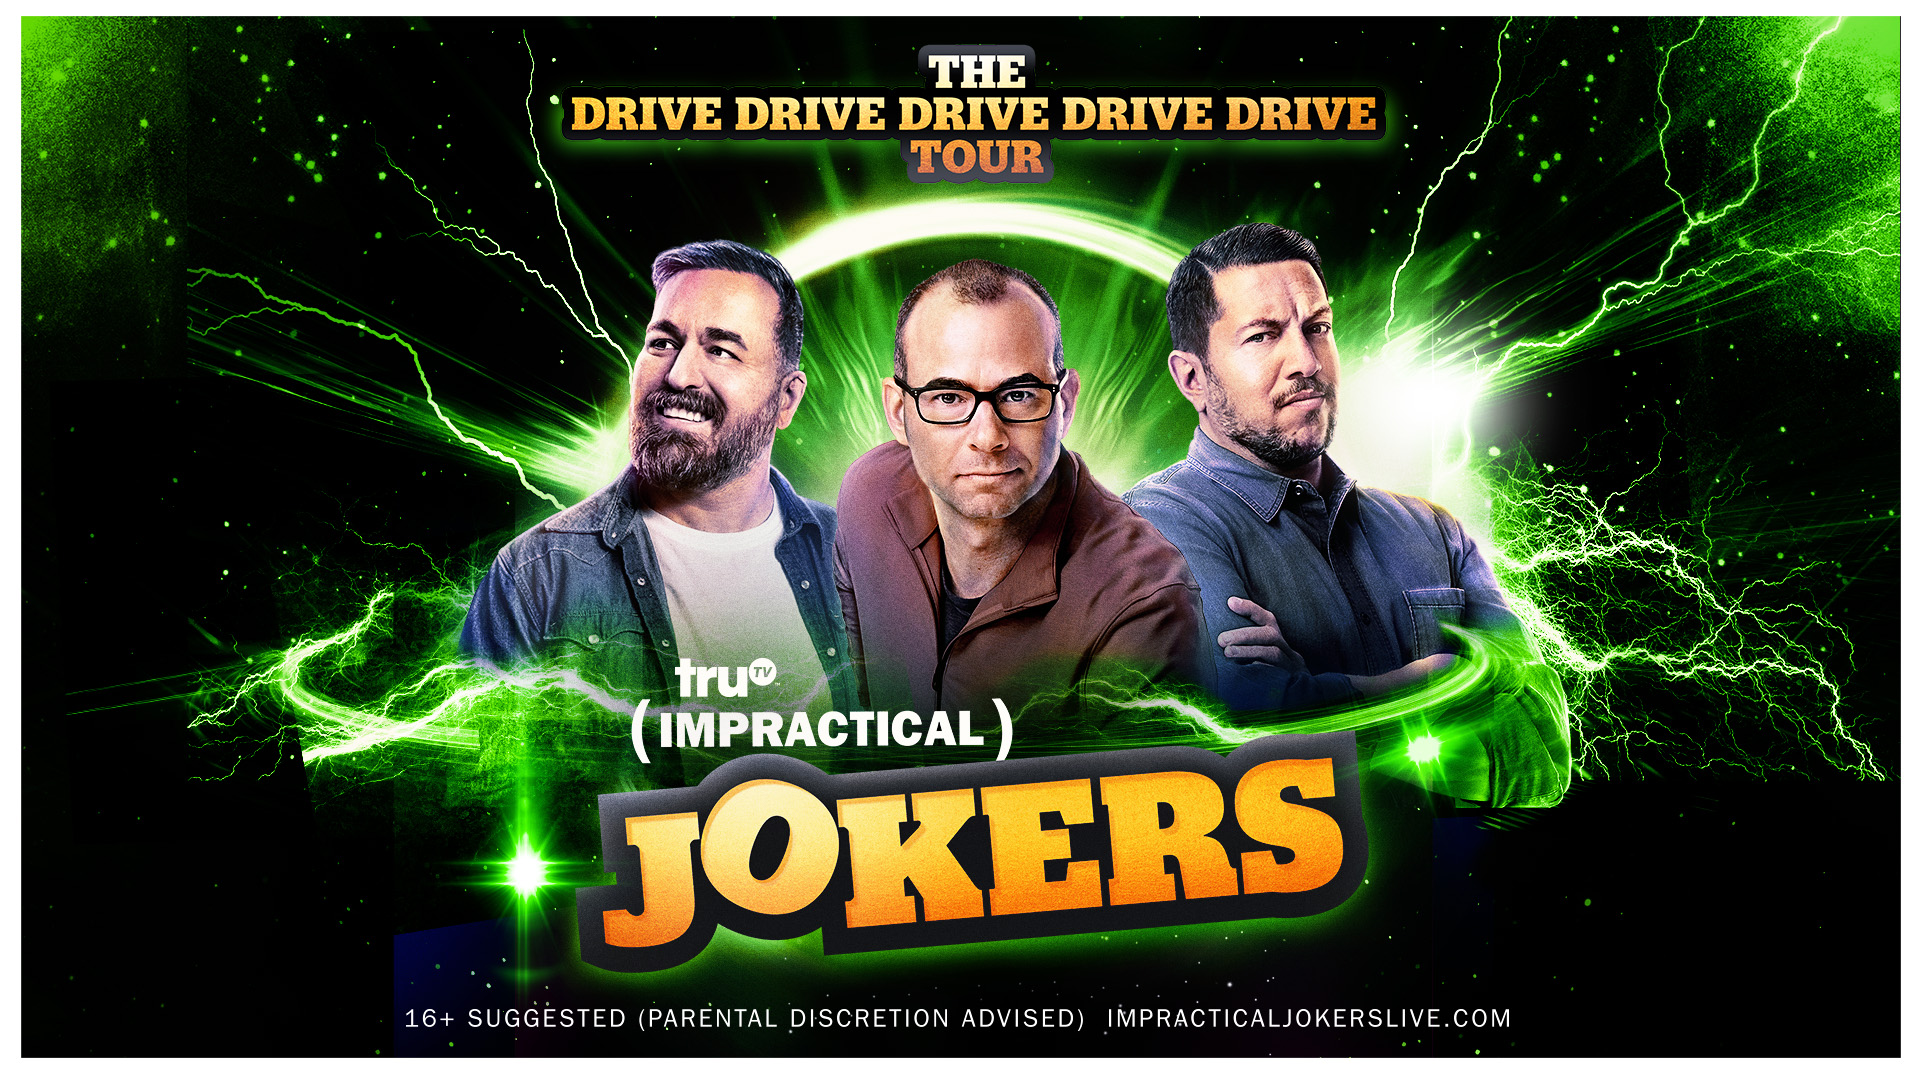 impractical jokers tour what do they do